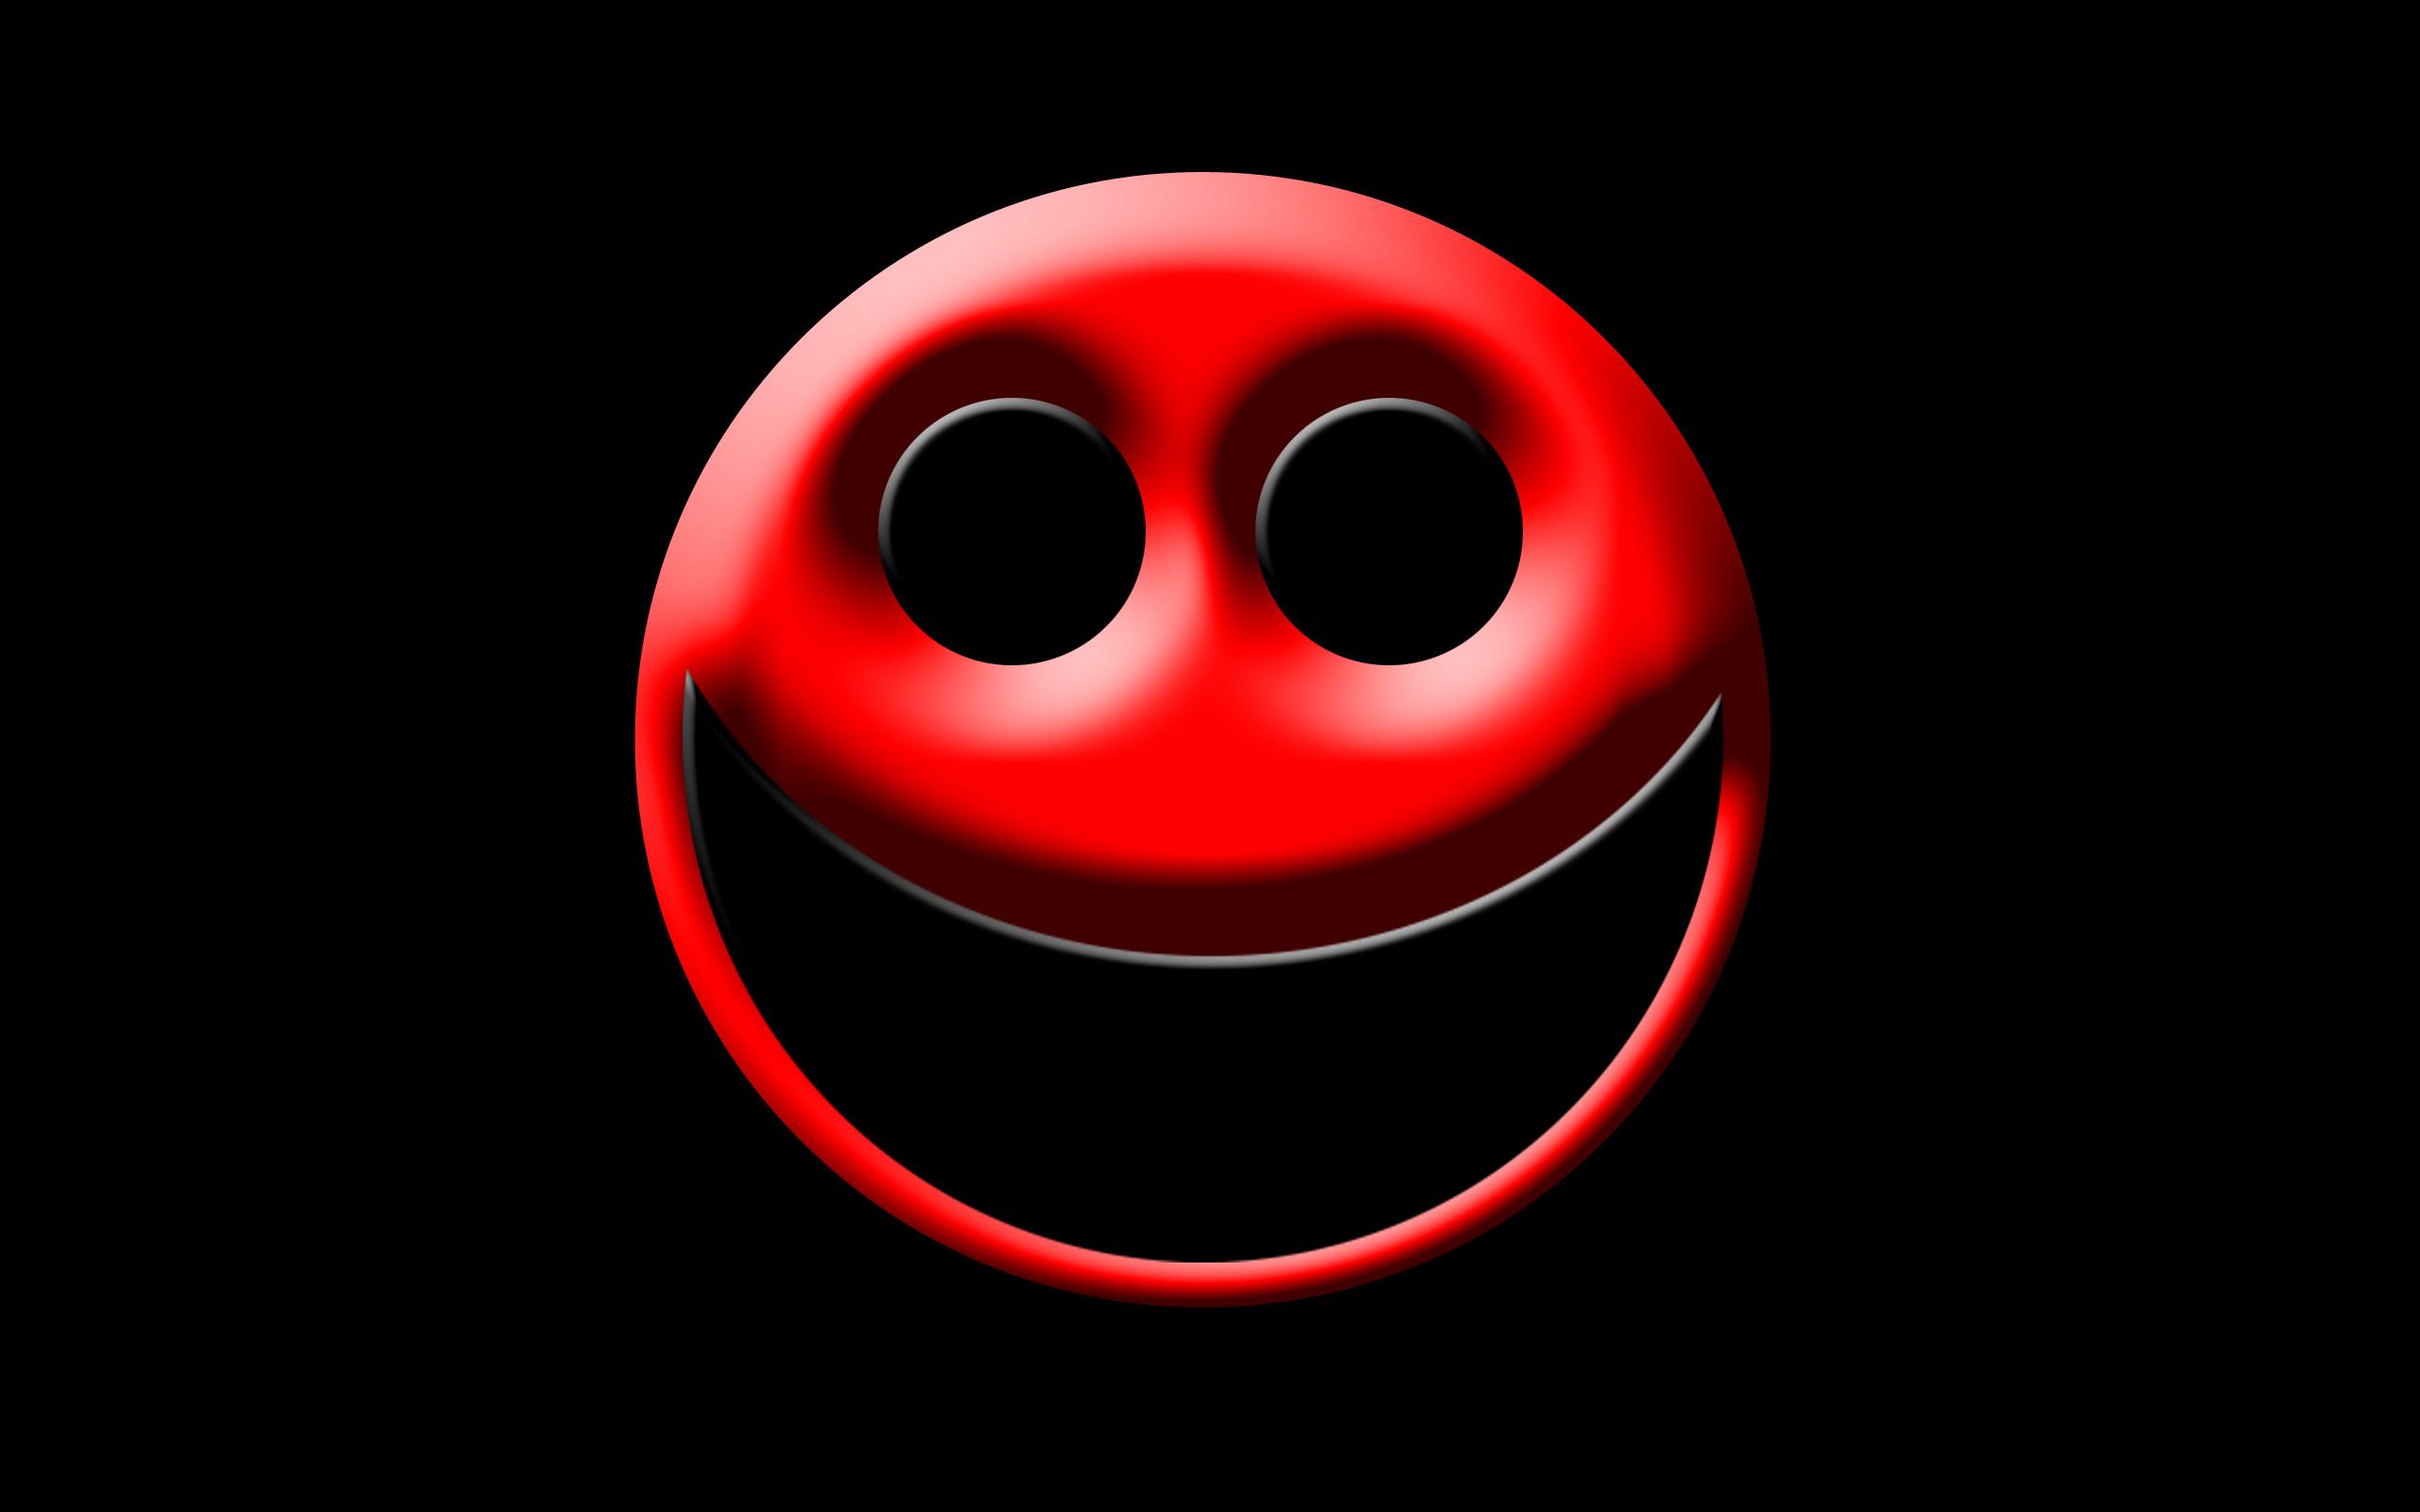 2560x1600 Wallpaper #24 Smiley | Red and Black Wallpapers